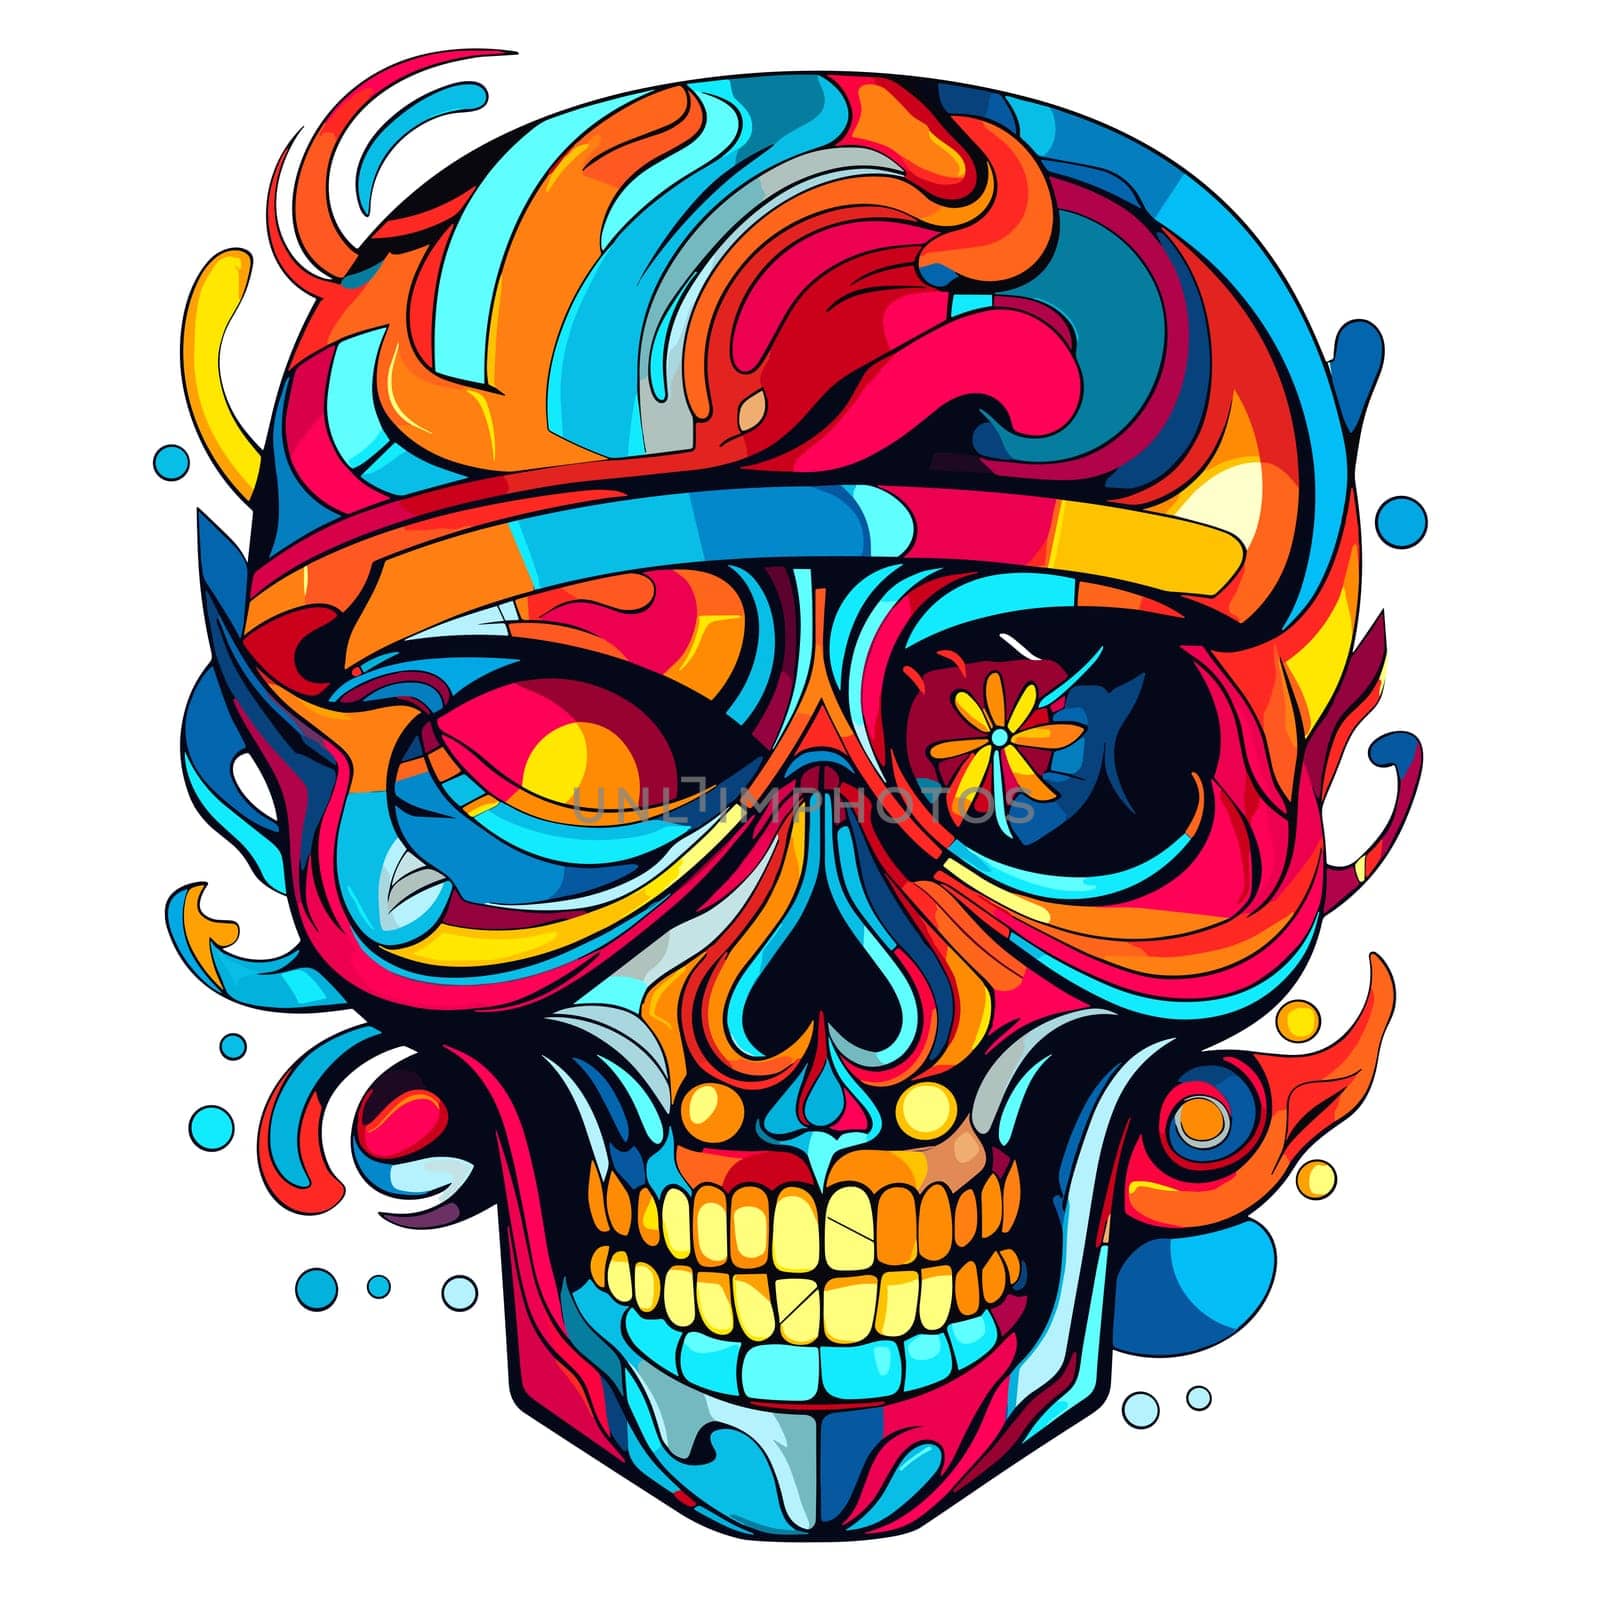 Skull in psychedelic vector pop art style. Graphic design for t-shirt print, sticker, poster, etc.